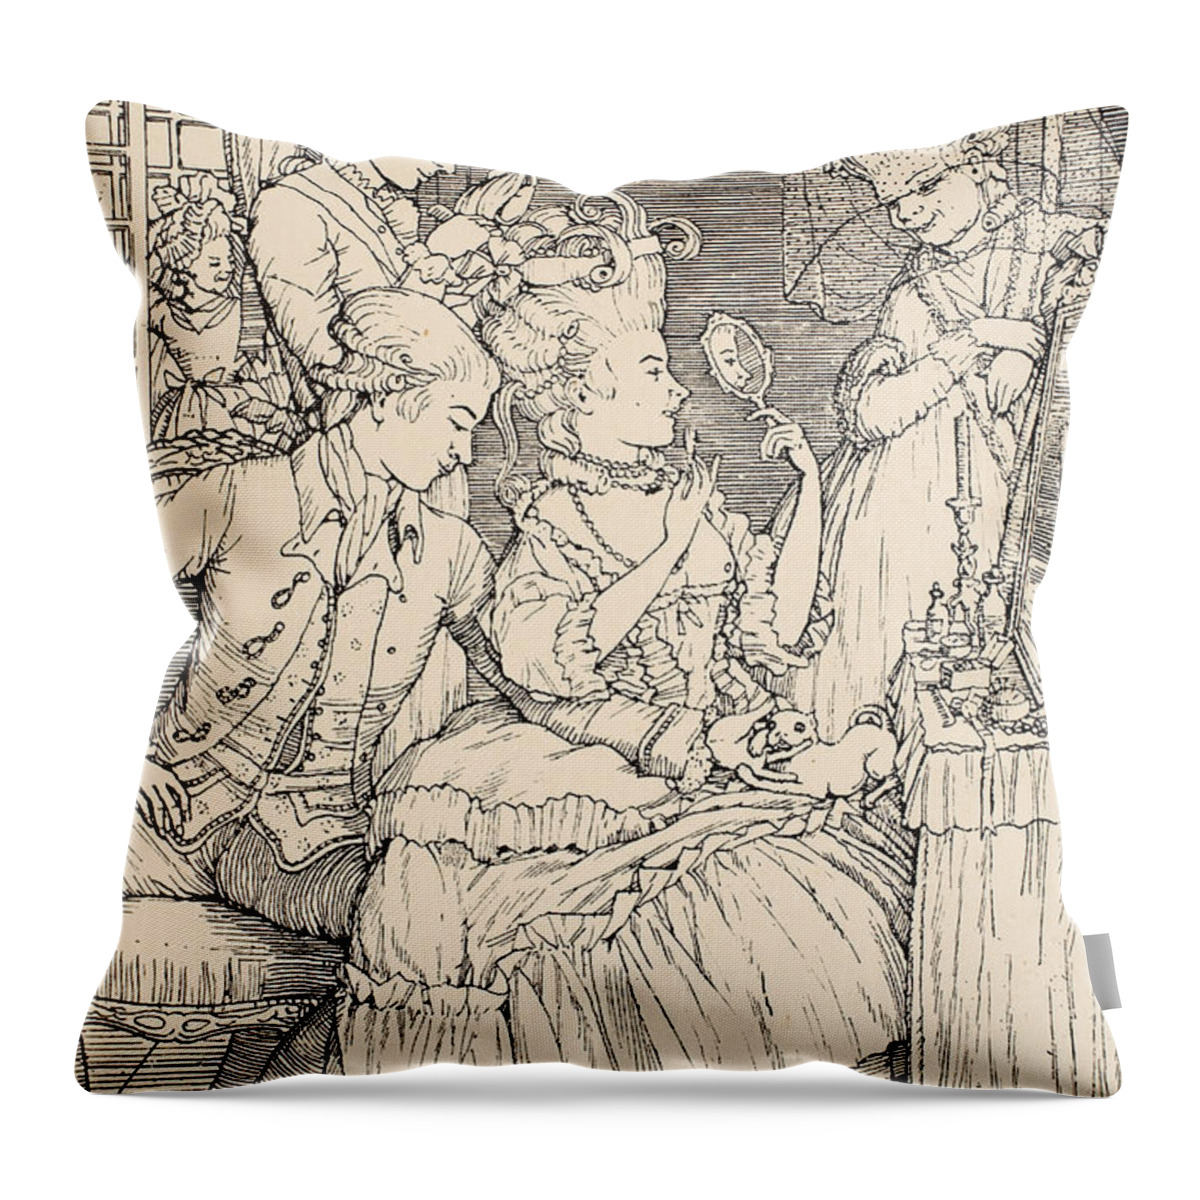 Somov Throw Pillow featuring the drawing La Toilette by Konstantin Andreevic Somov